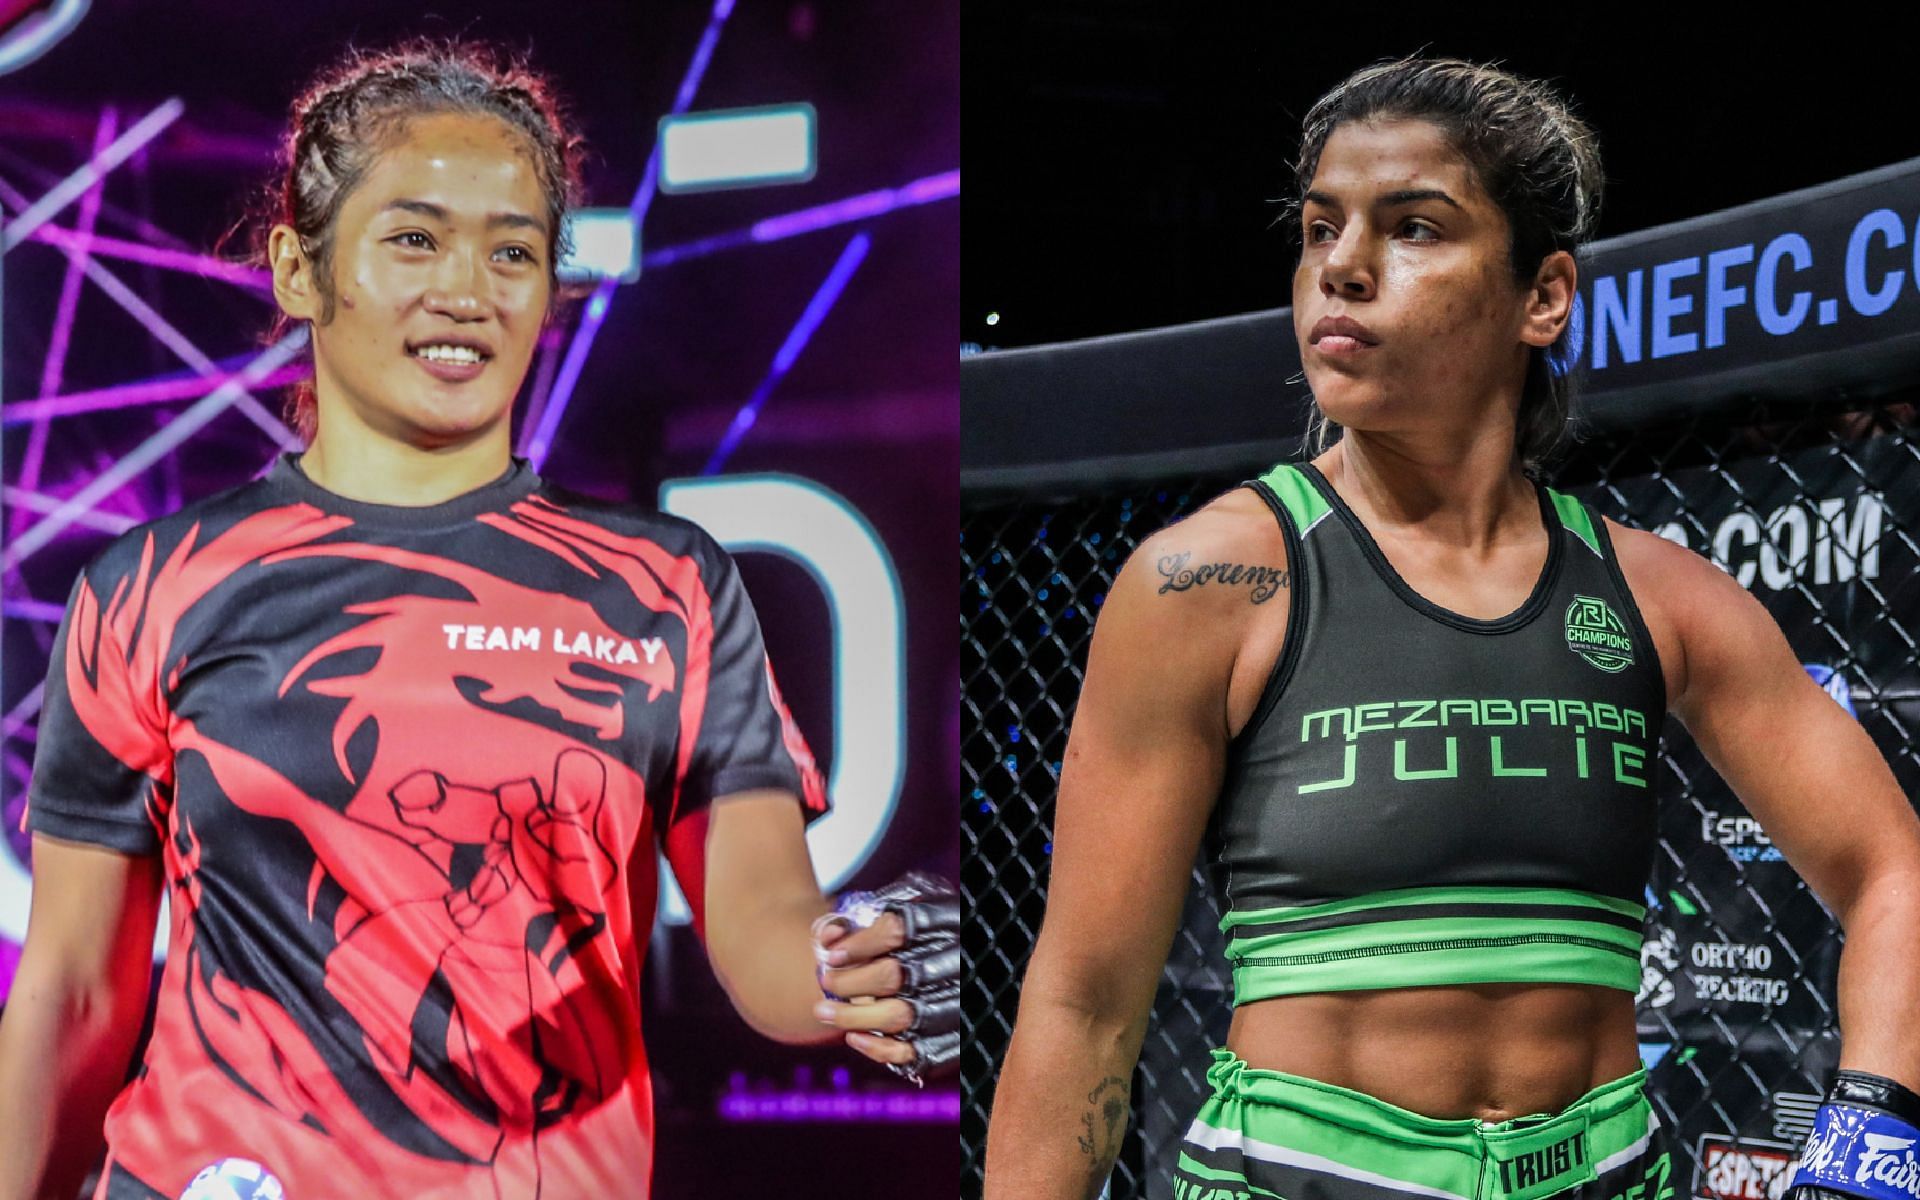 Jenelyn Olsim (left) will return to the Circle when she takes on Julie Mezabarba (right) at ONE 158. [Photos ONE Championship]